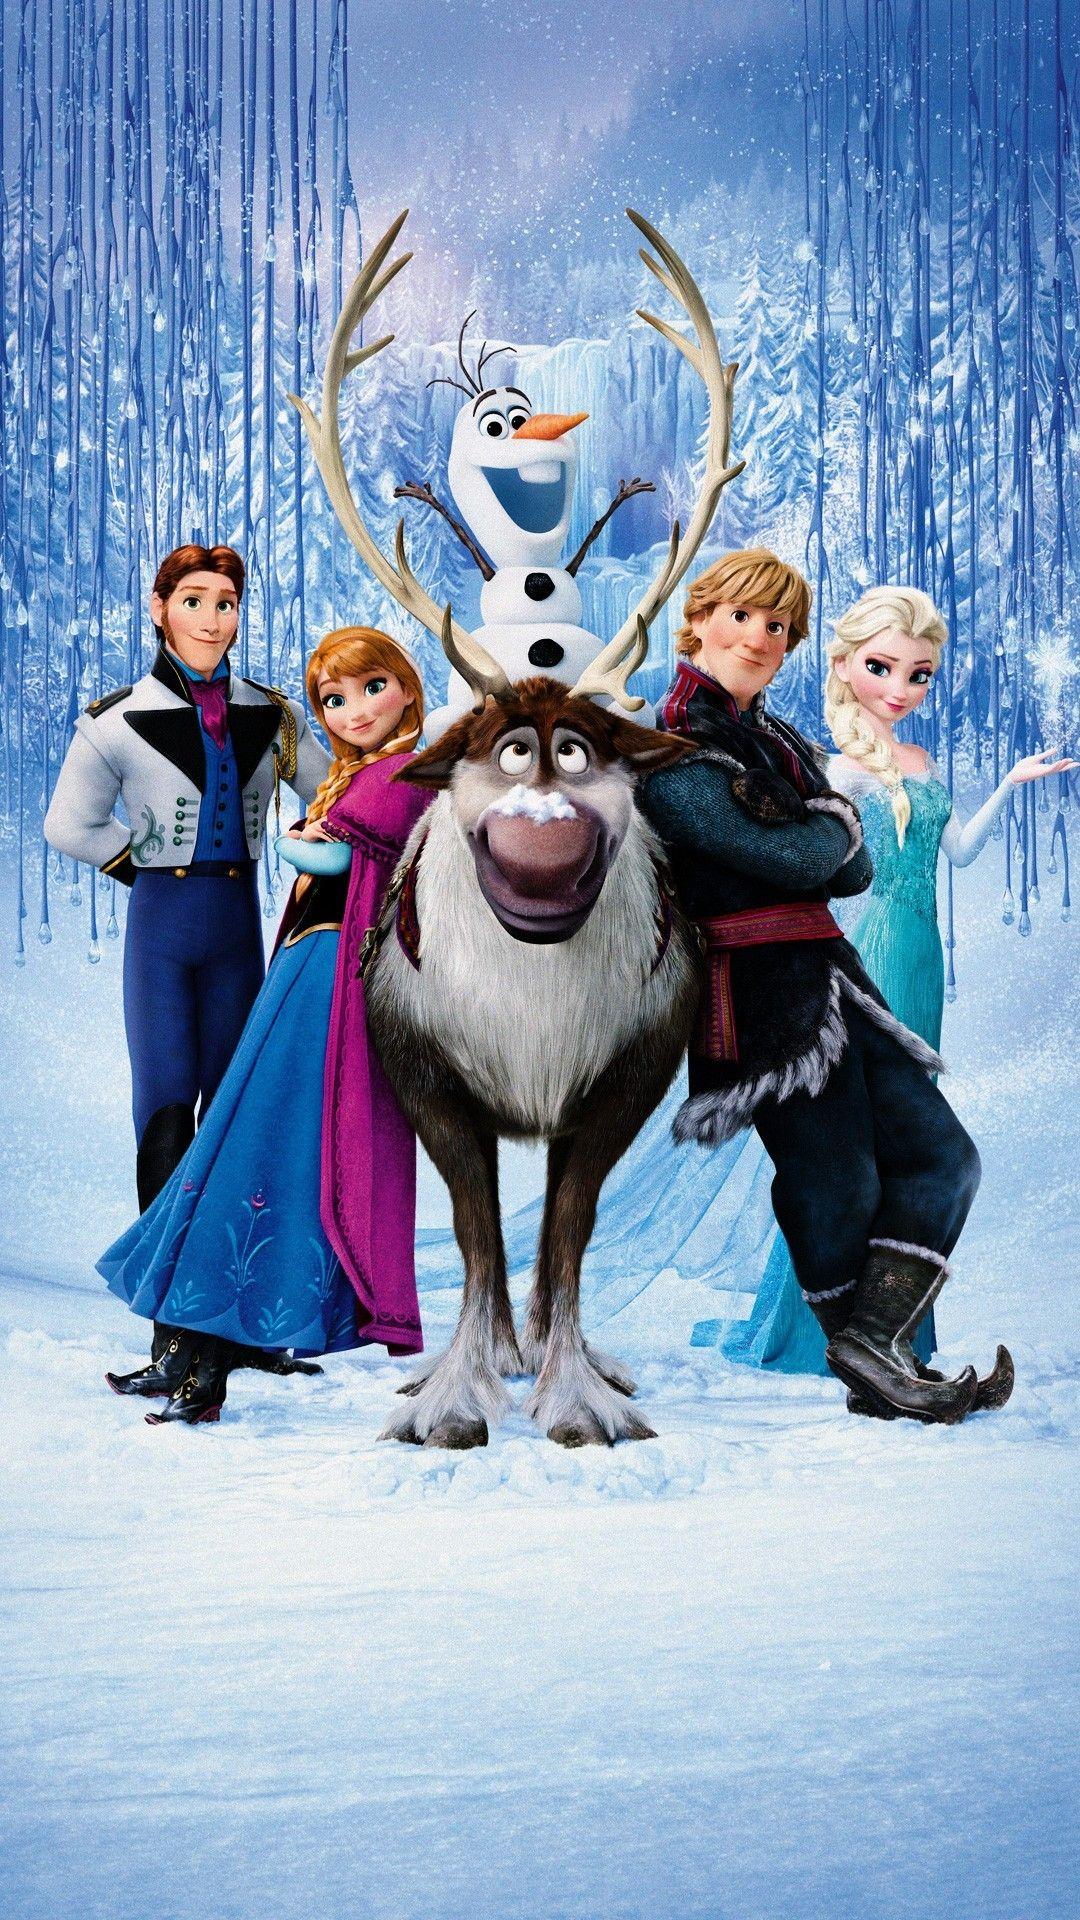 Frozen download the new version